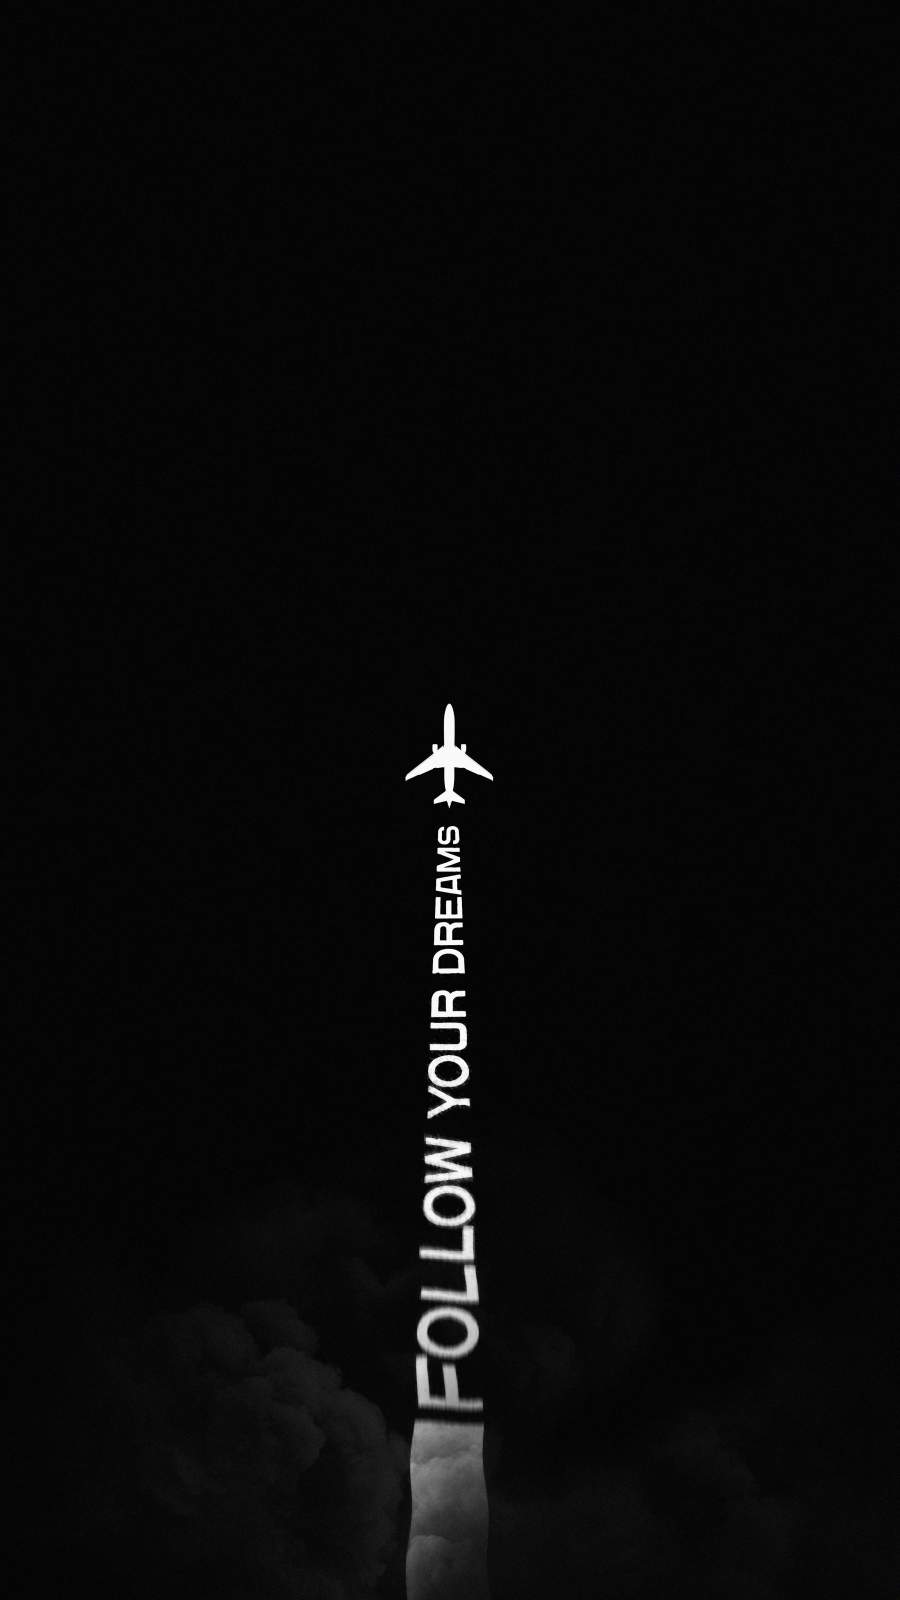 Follow Your Dreams - IPhone Wallpapers : iPhone Wallpapers